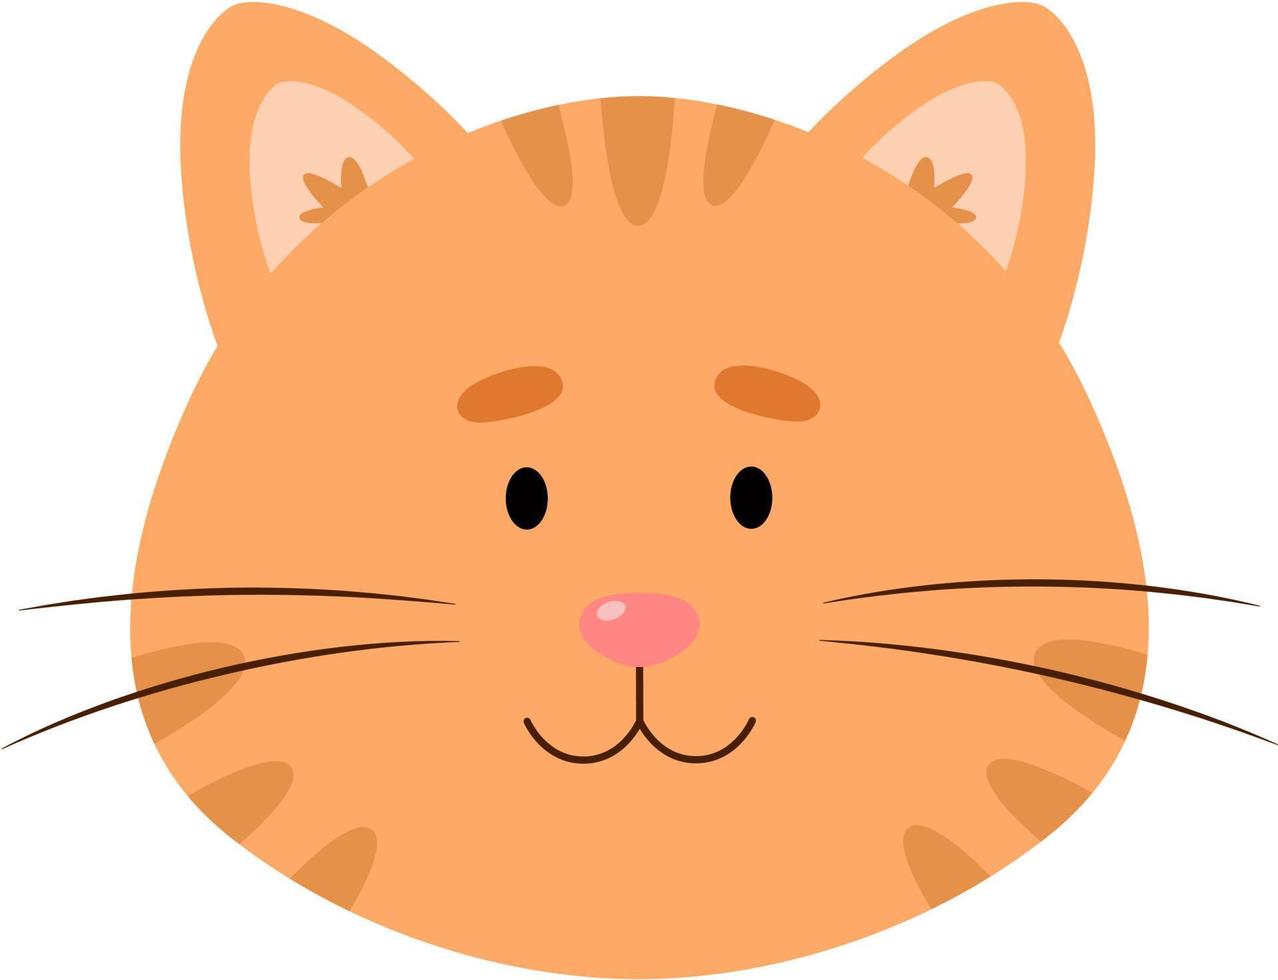 Cat face character. A cute orange kitten on white background. Funny fat cat smiling. Vector illustration for greeting card, invitation.